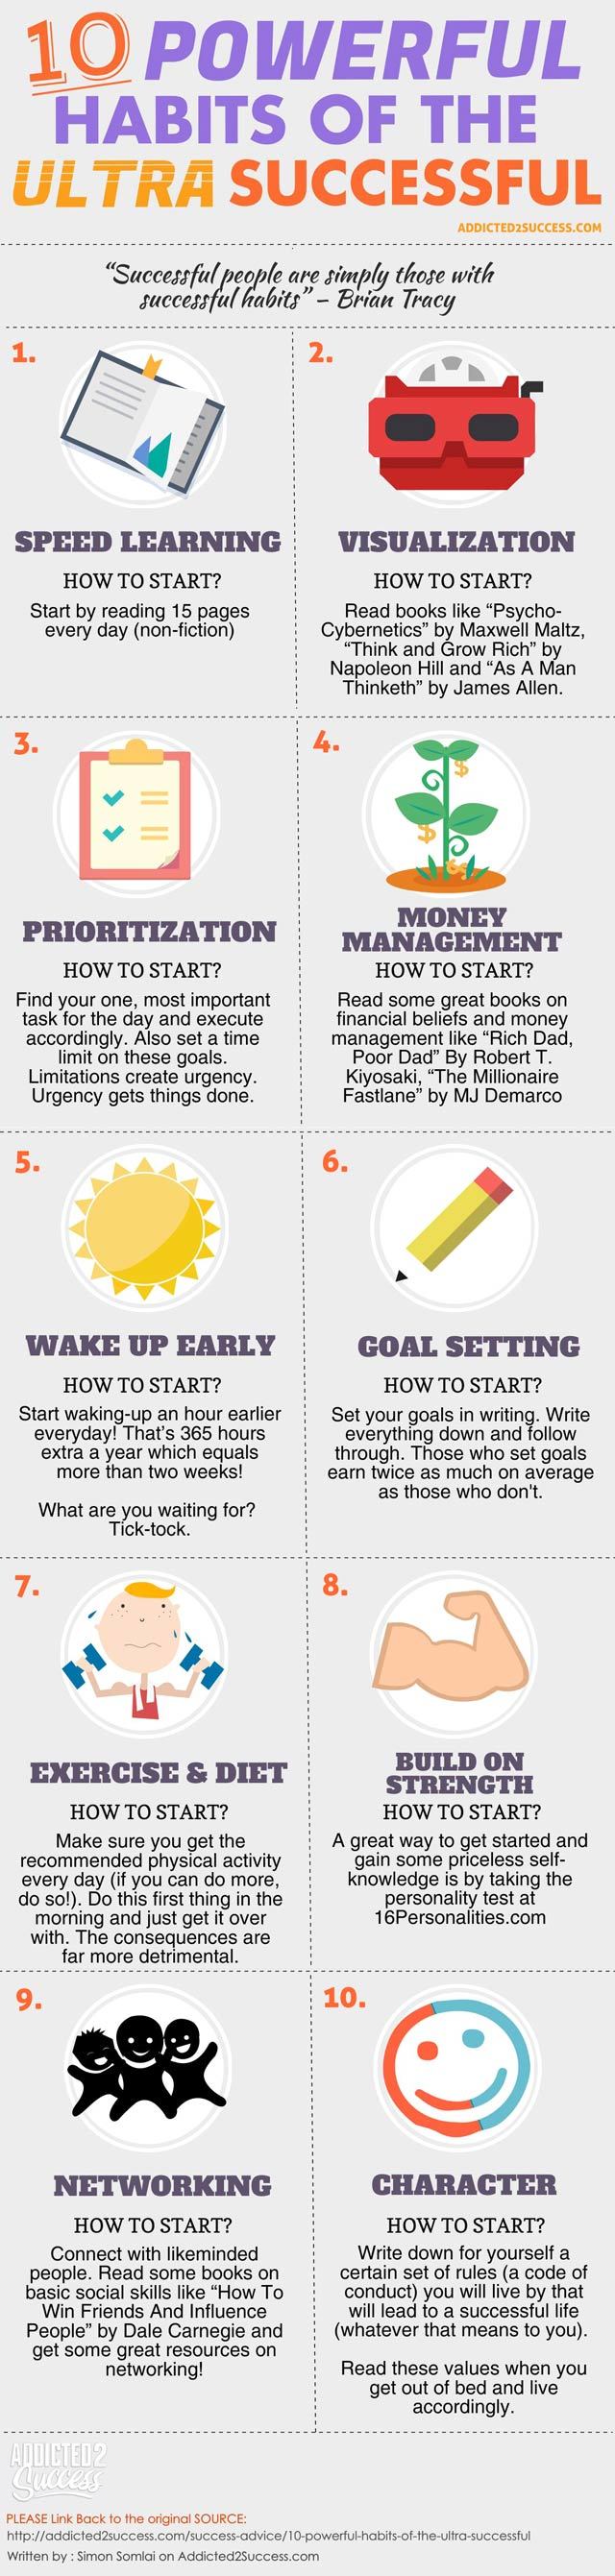 10 Powerful Habits of Ultra Successful People